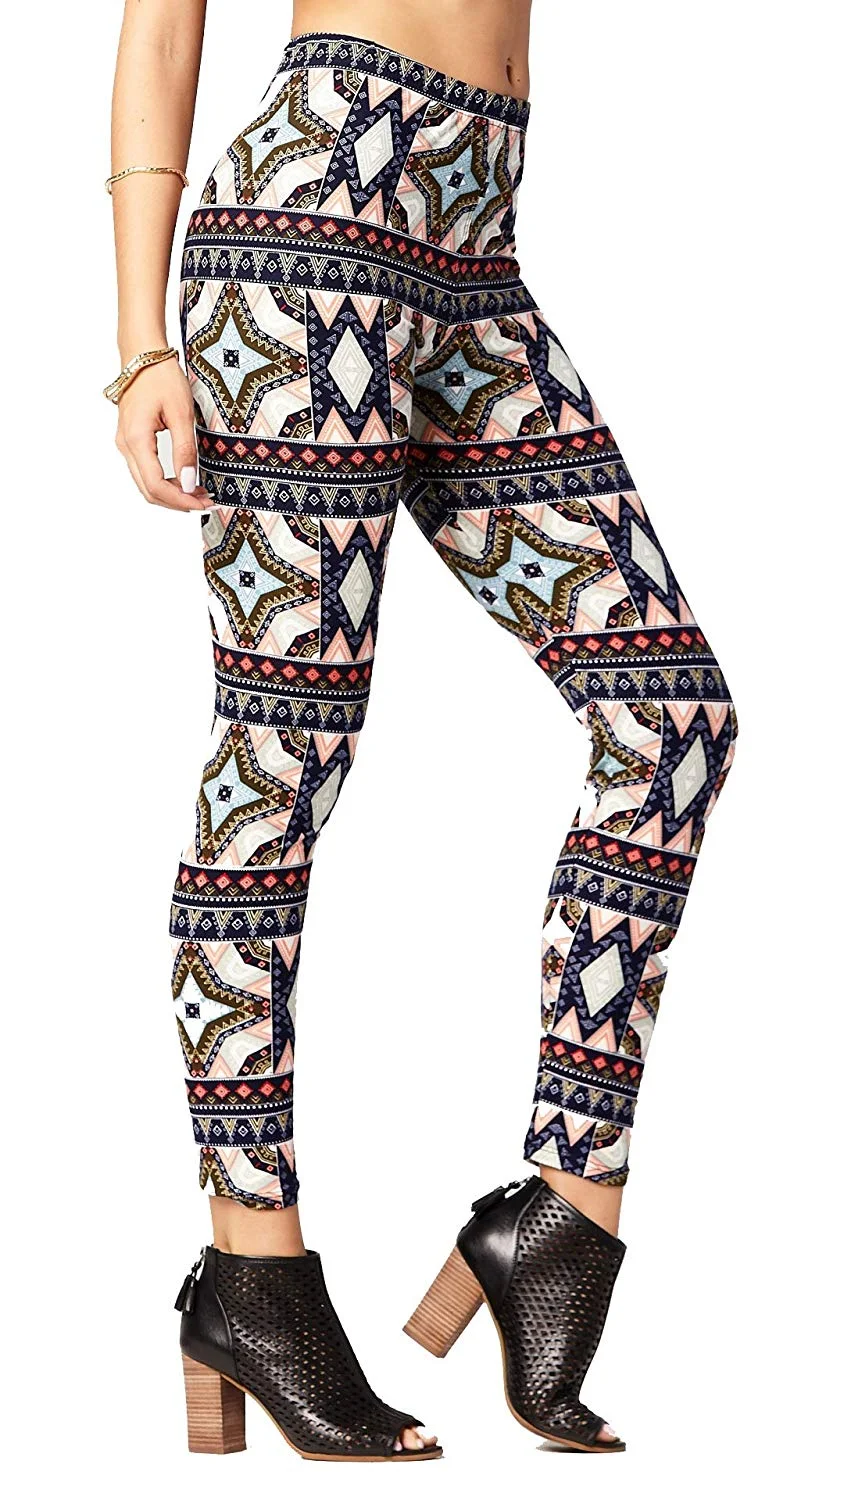 Premium Ultra Soft High Waisted Leggings for Women - Regular and Plus Size - Many Colors and Prints